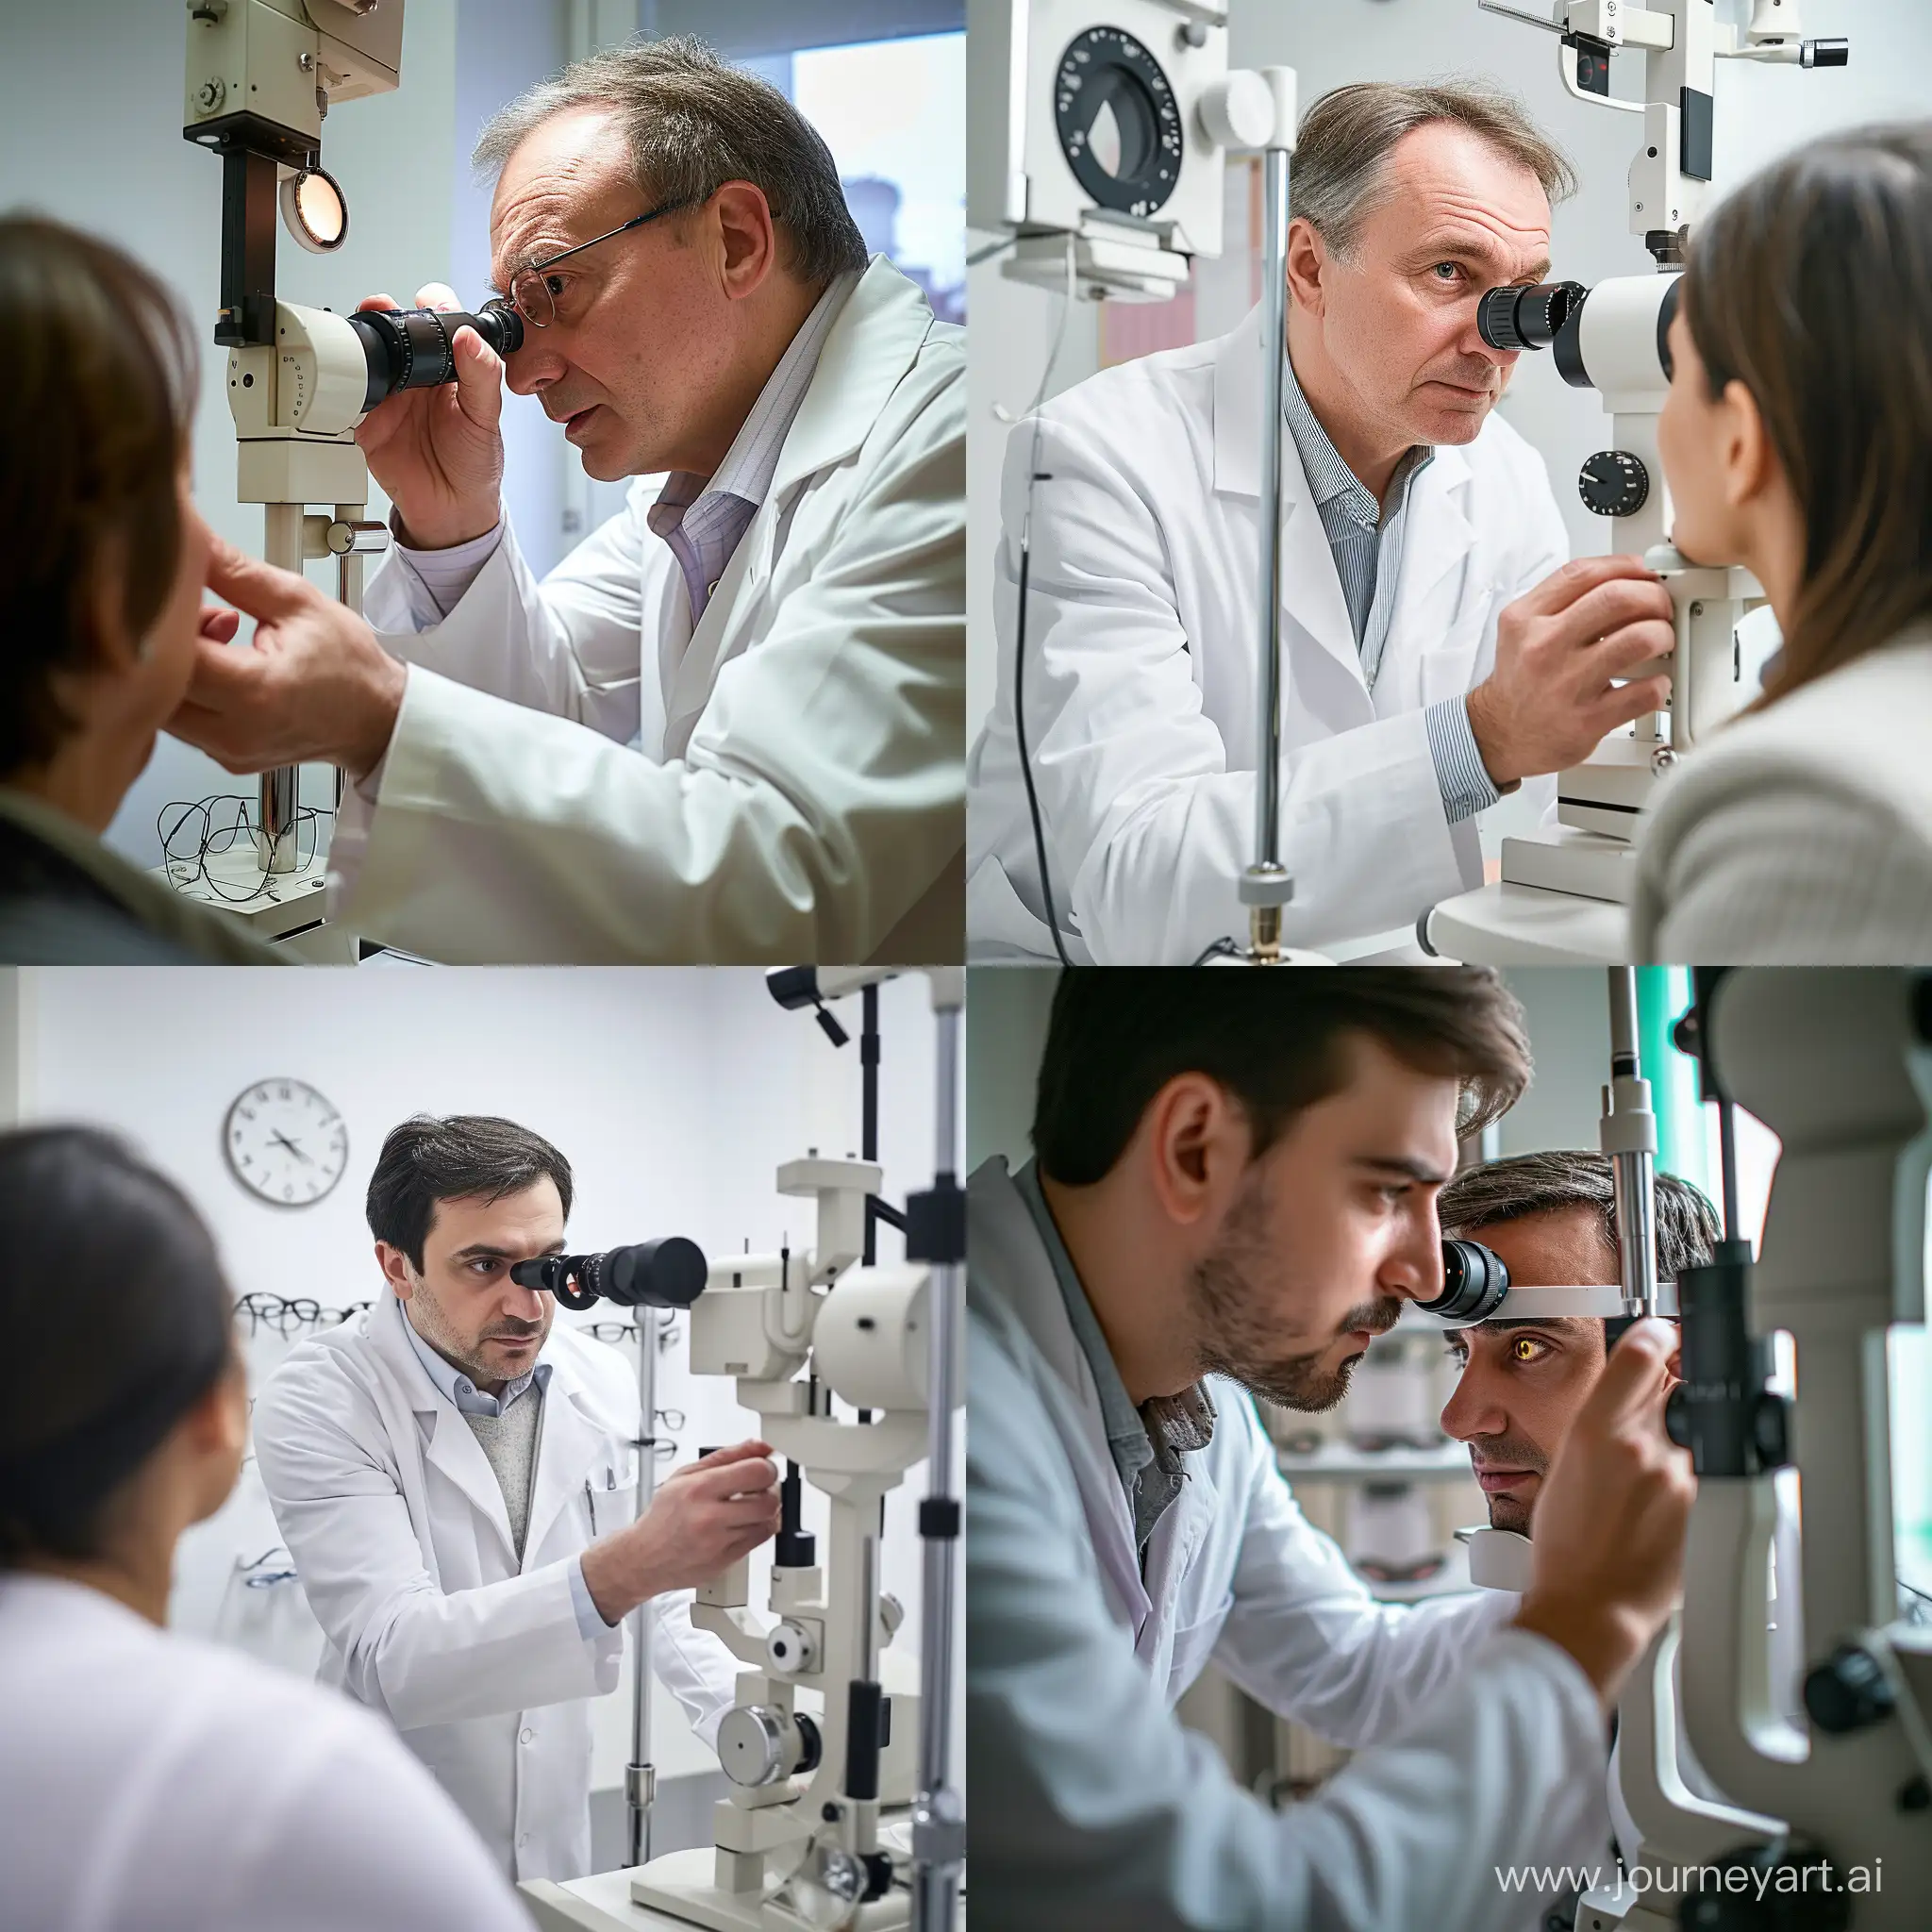 Professional-Ophthalmologist-Examining-Patients-Eye-in-Clinic